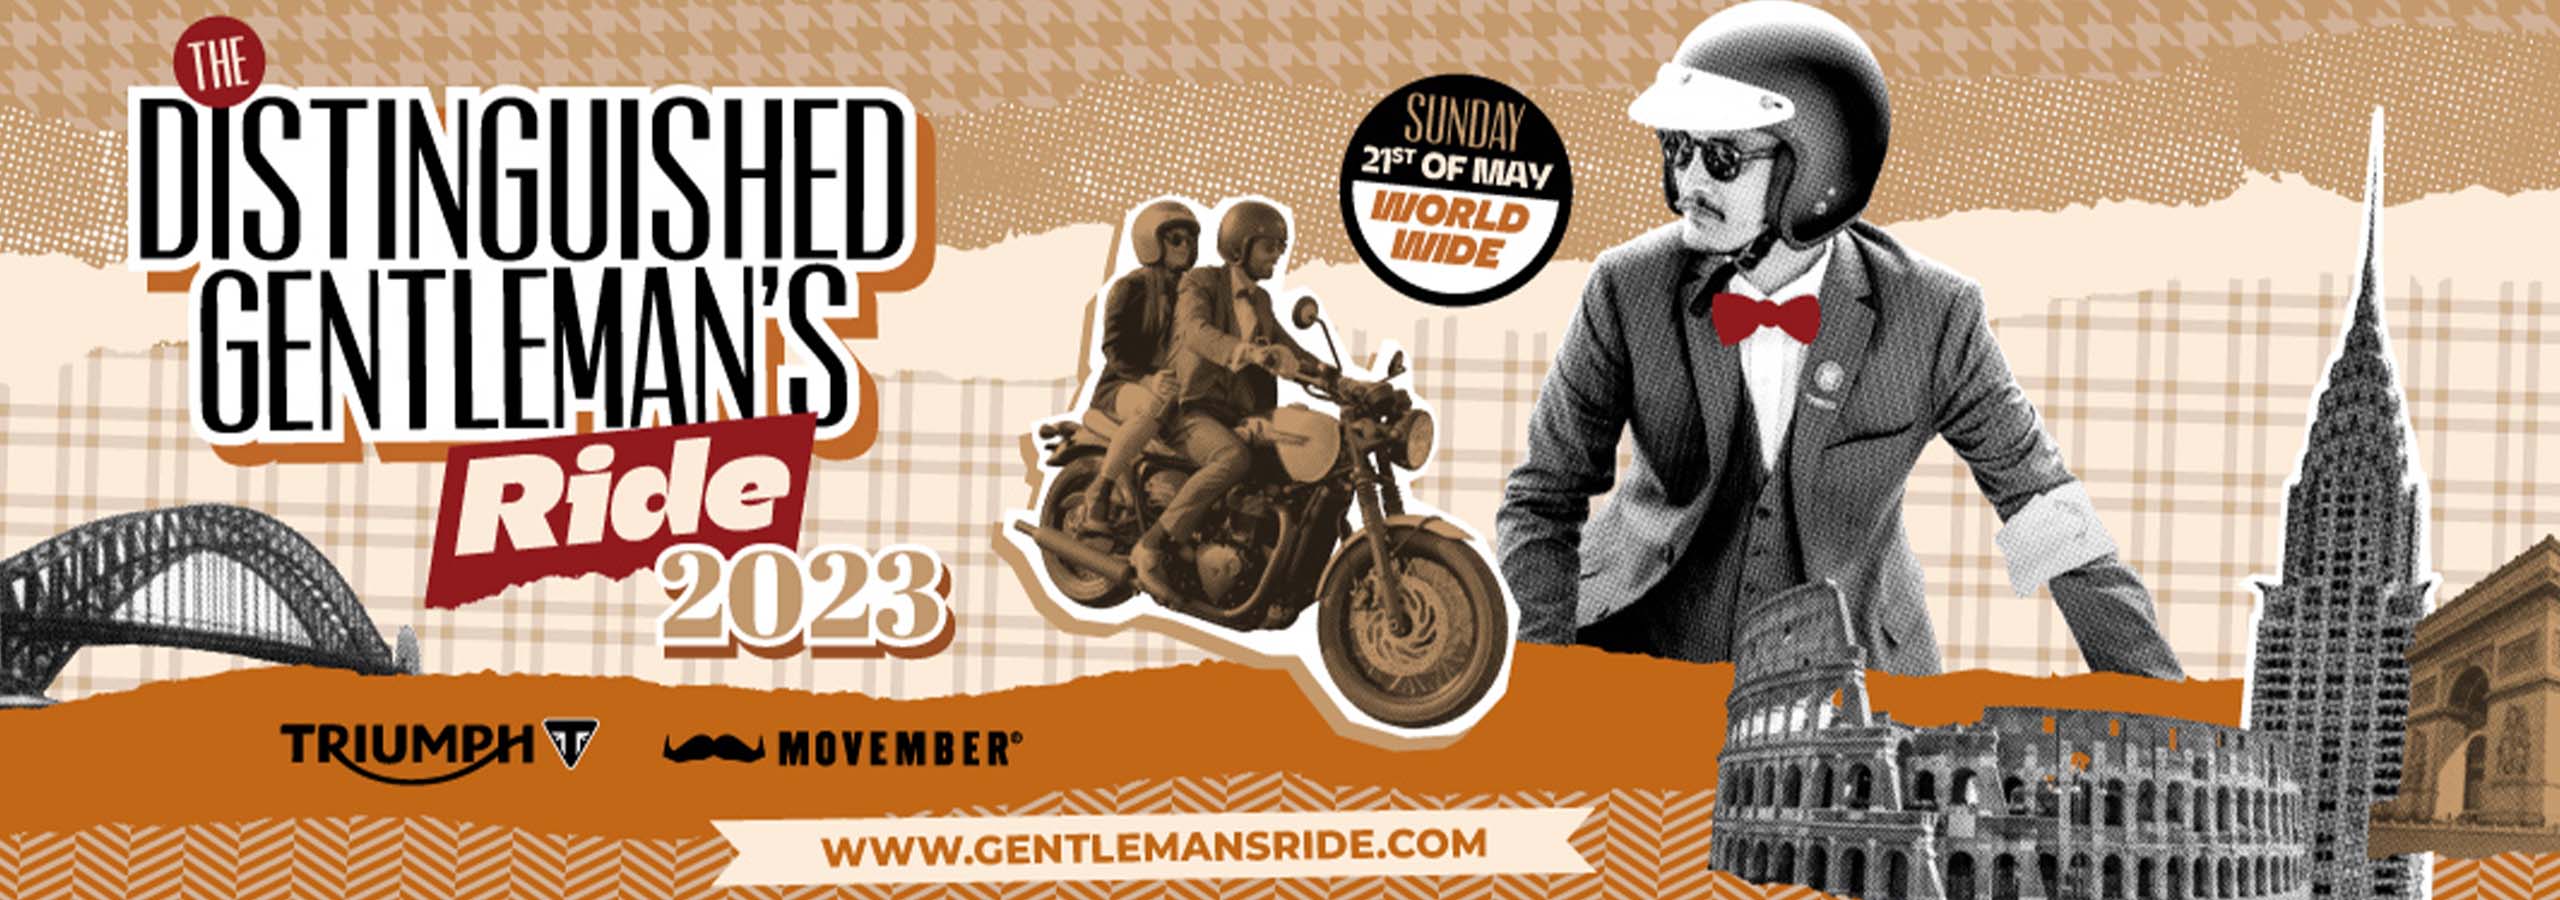 Ride with us for the 2023 Distinguished Gentleman's Ride 2023 at our BRAND NEW Laguna Triumph store in Aylesford, Maidstone